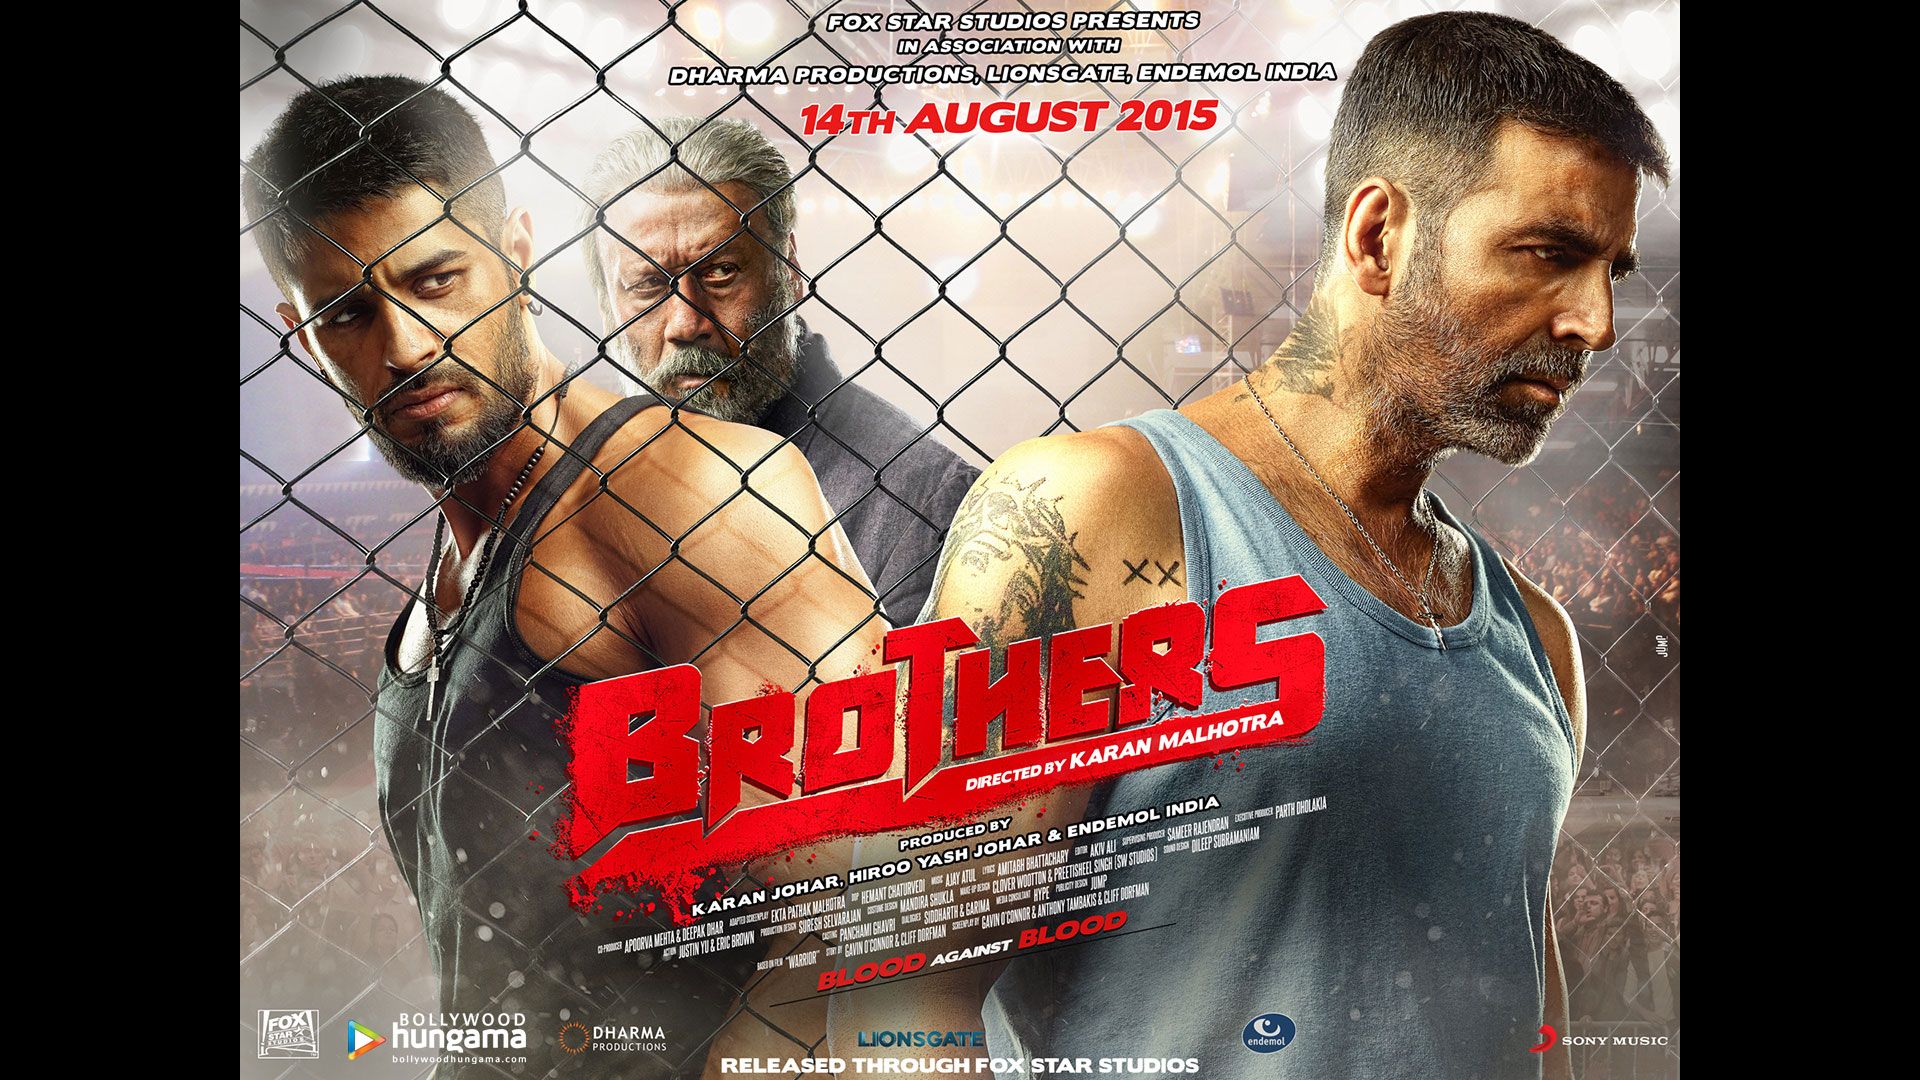 Brothers 2015 Wallpaper. Brothers 2